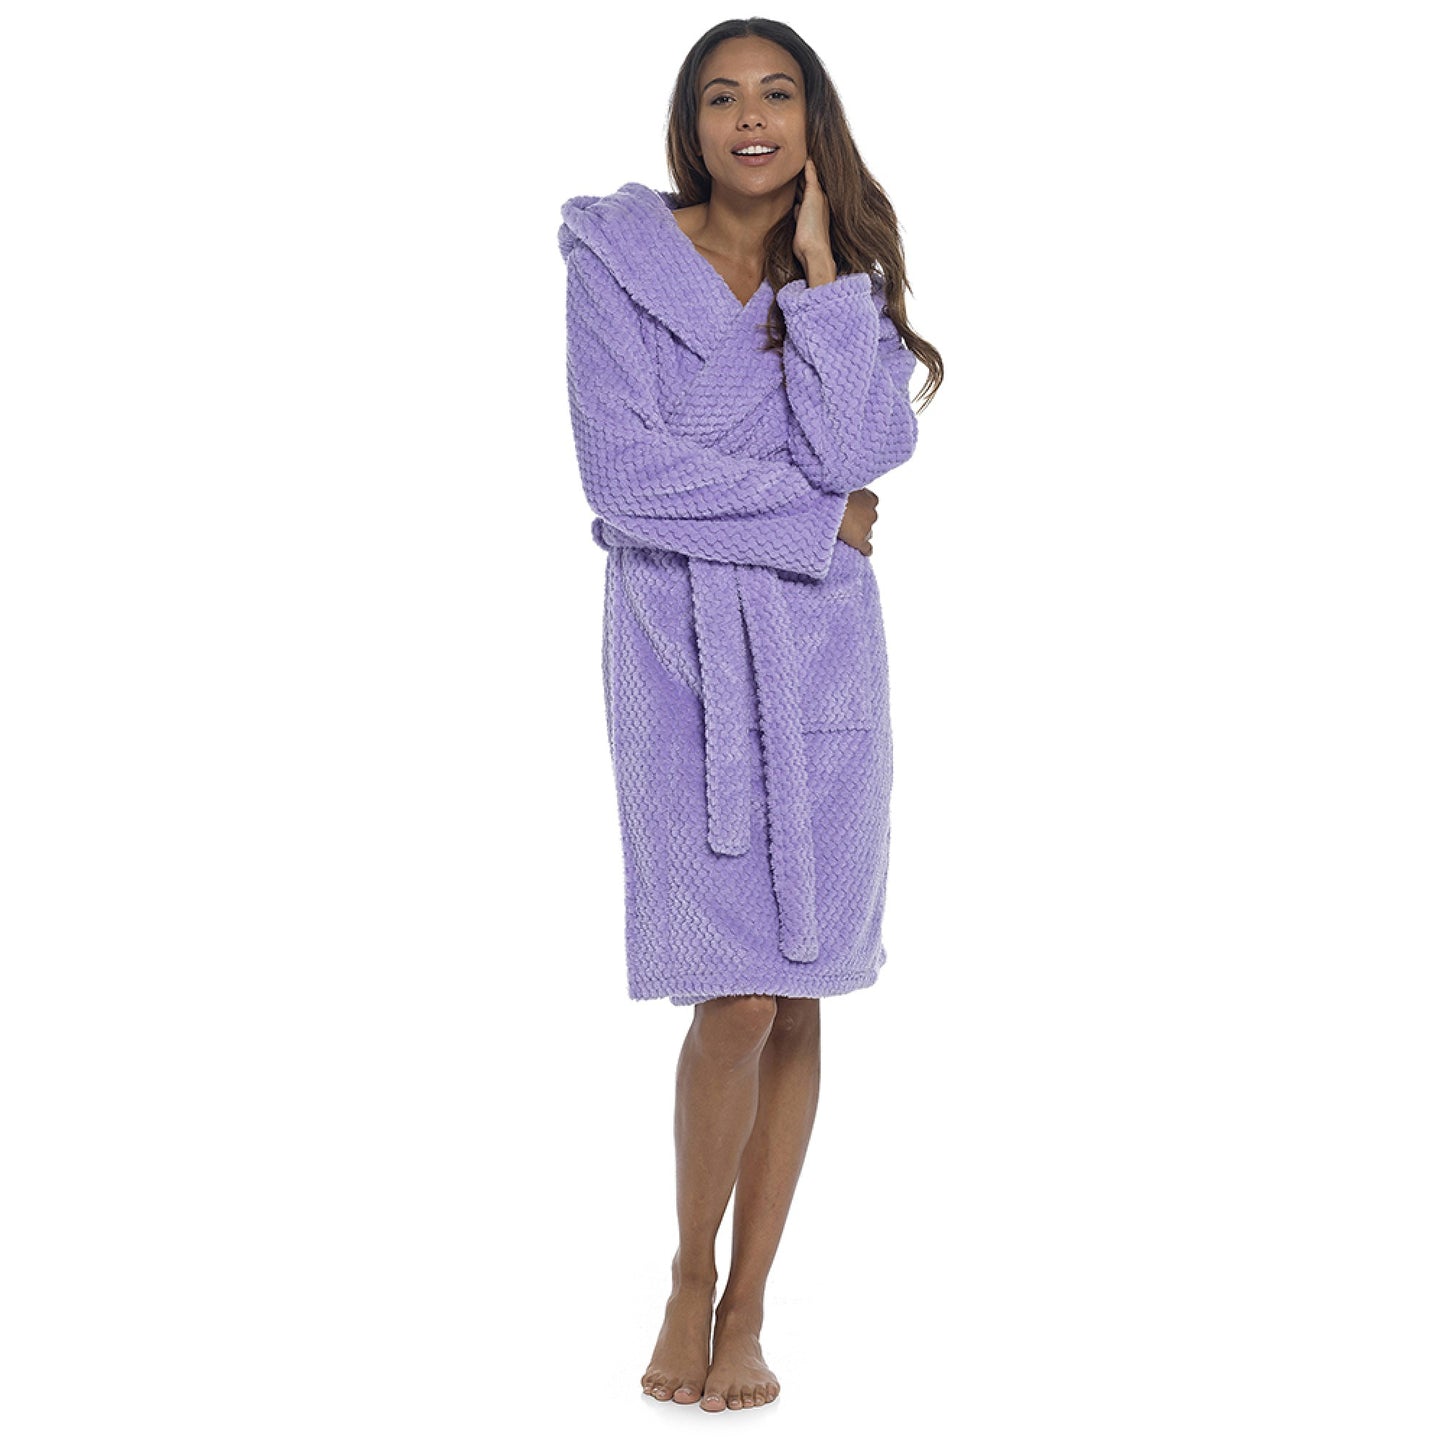 Ladies Lilac Hooded Dressing Gown Soft Warm Honeycomb Fleece Robe with Tie Waist and Pockets